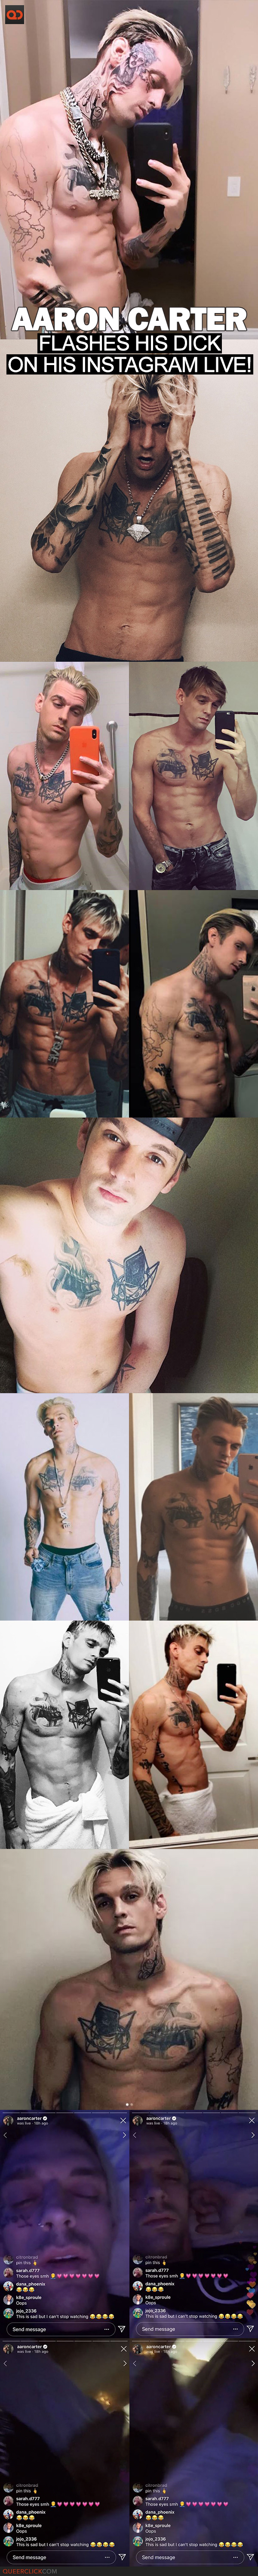 Aaron Carter Flashed His Dick On Instagram Live!